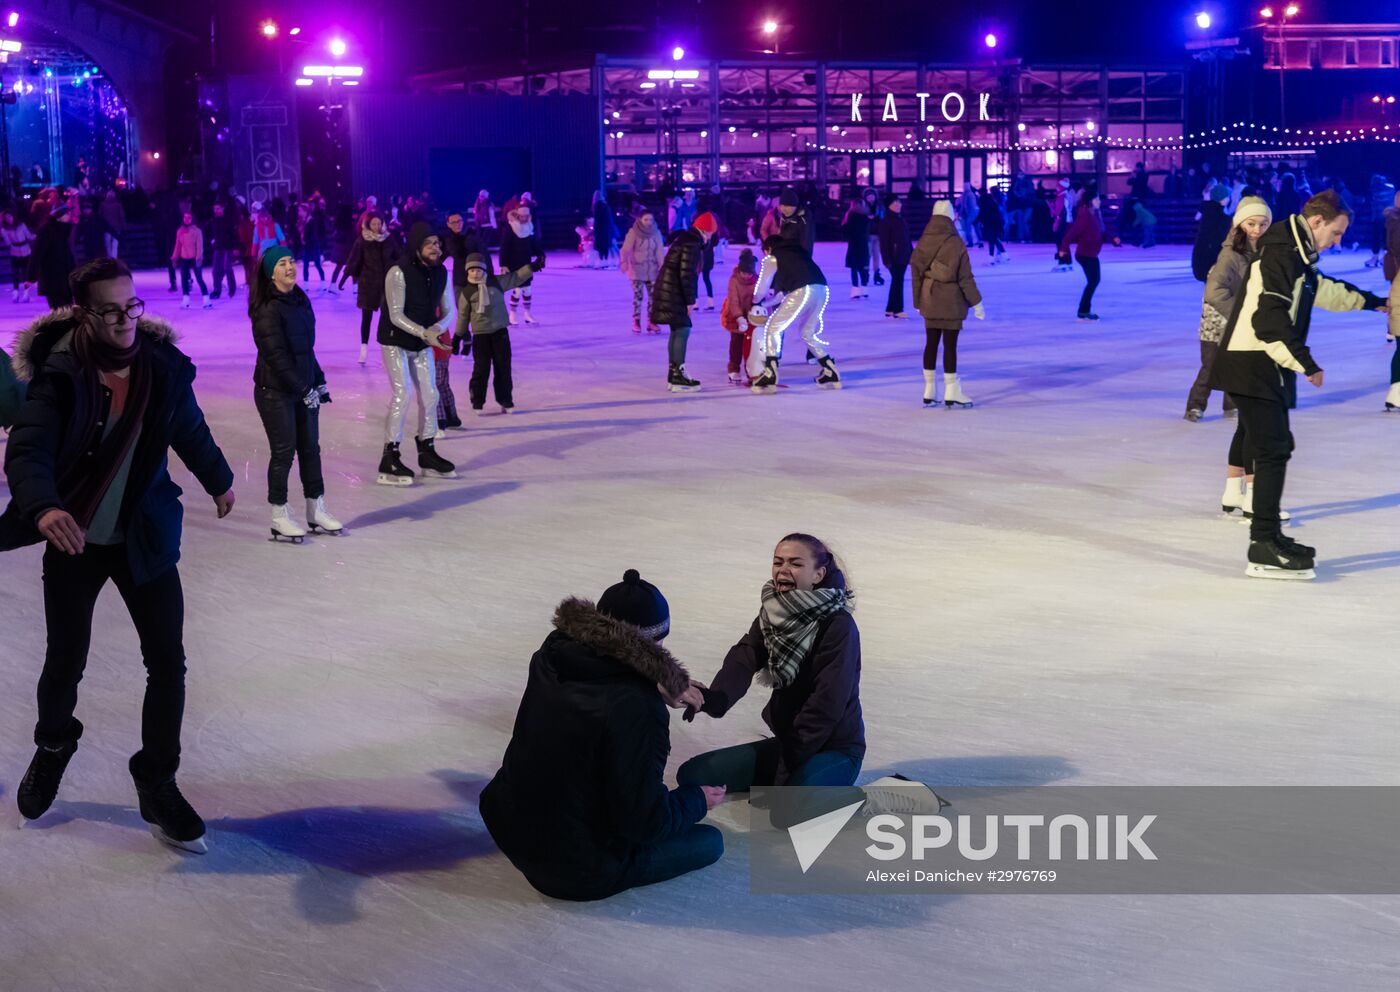 Ice rink opens on New Holland island in St. Petersburg